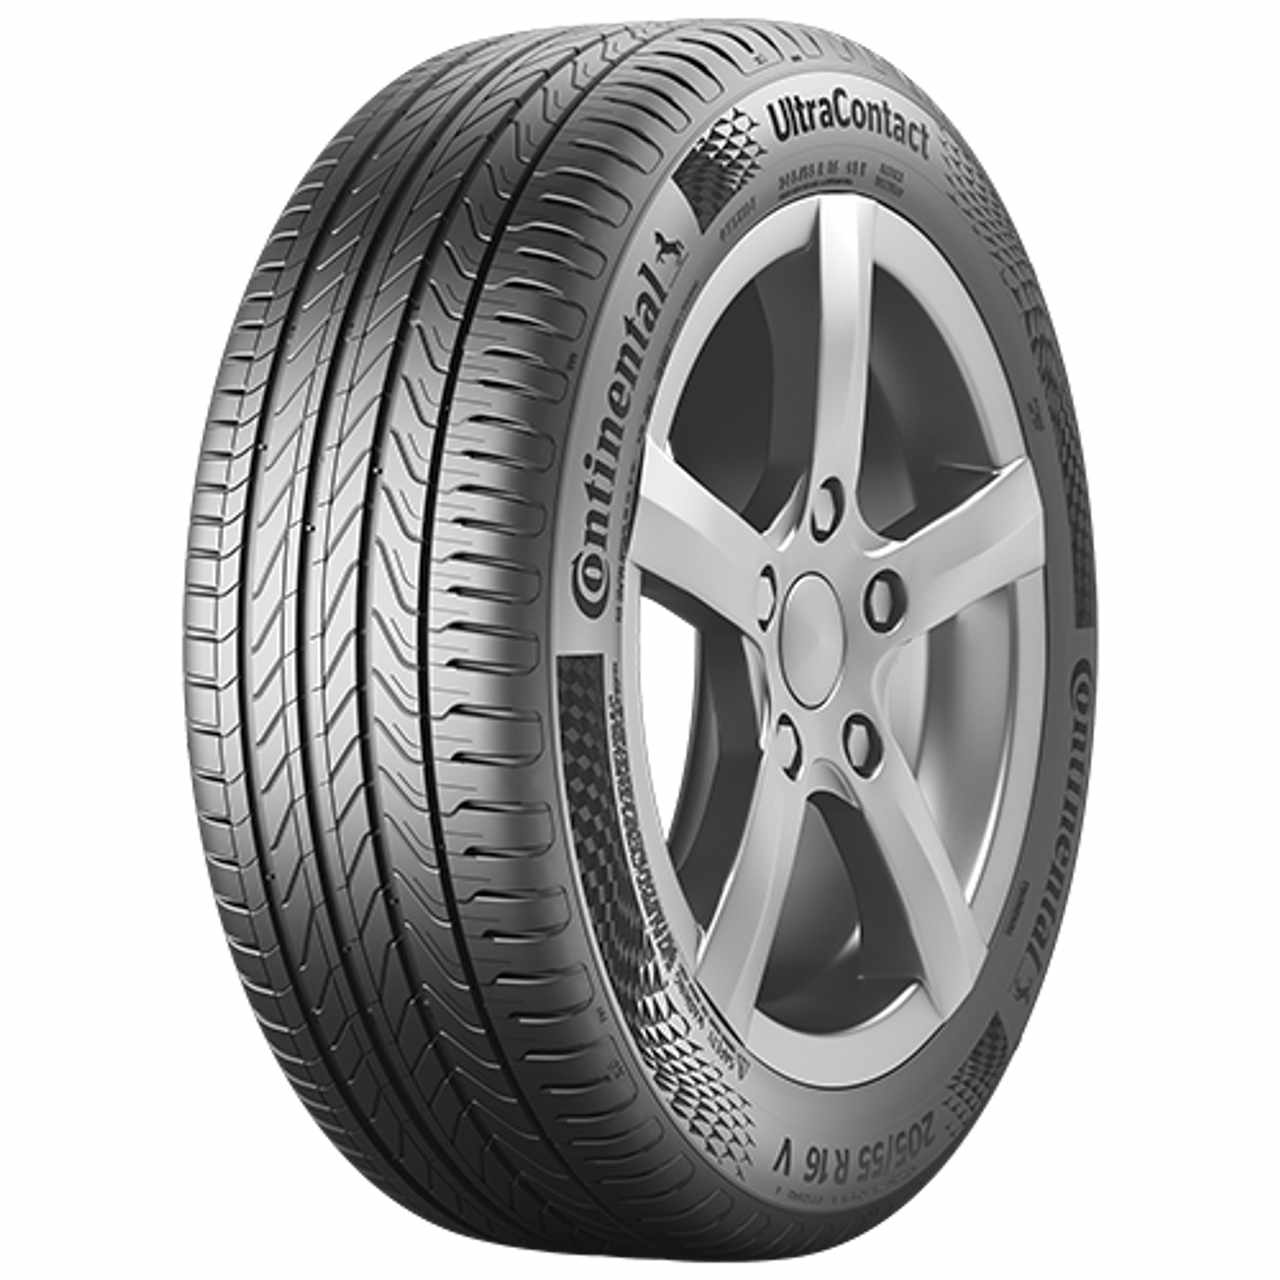 CONTINENTAL ULTRACONTACT (EVc) 225/45R17 94W FR BSW XL